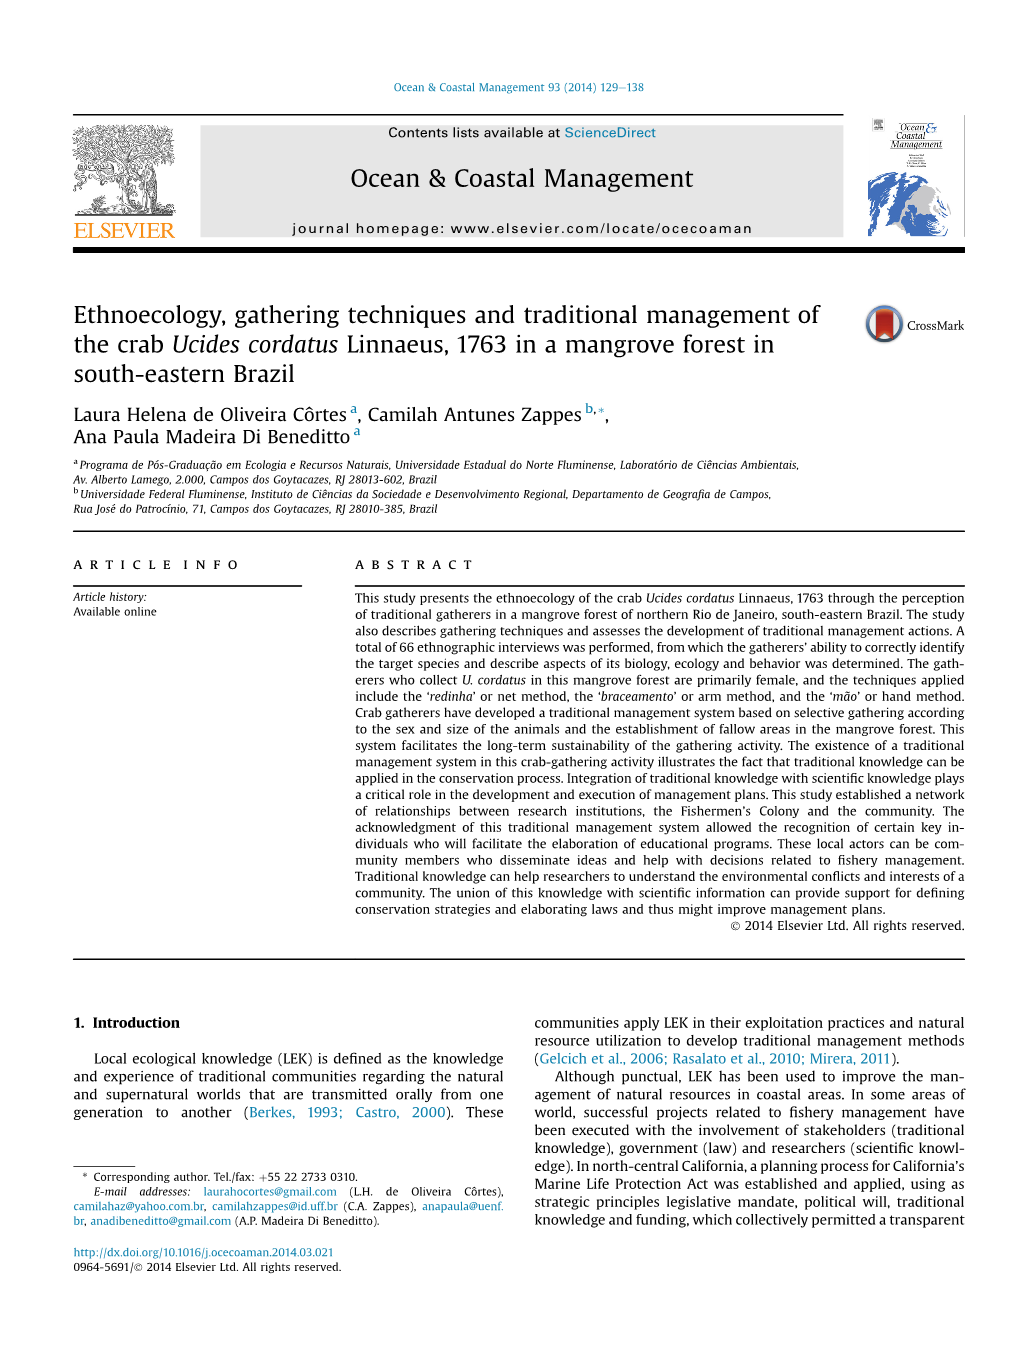 Ethnoecology, Gathering Techniques and Traditional Management of the Crab Ucides Cordatus Linnaeus, 1763 in a Mangrove Forest in South-Eastern Brazil